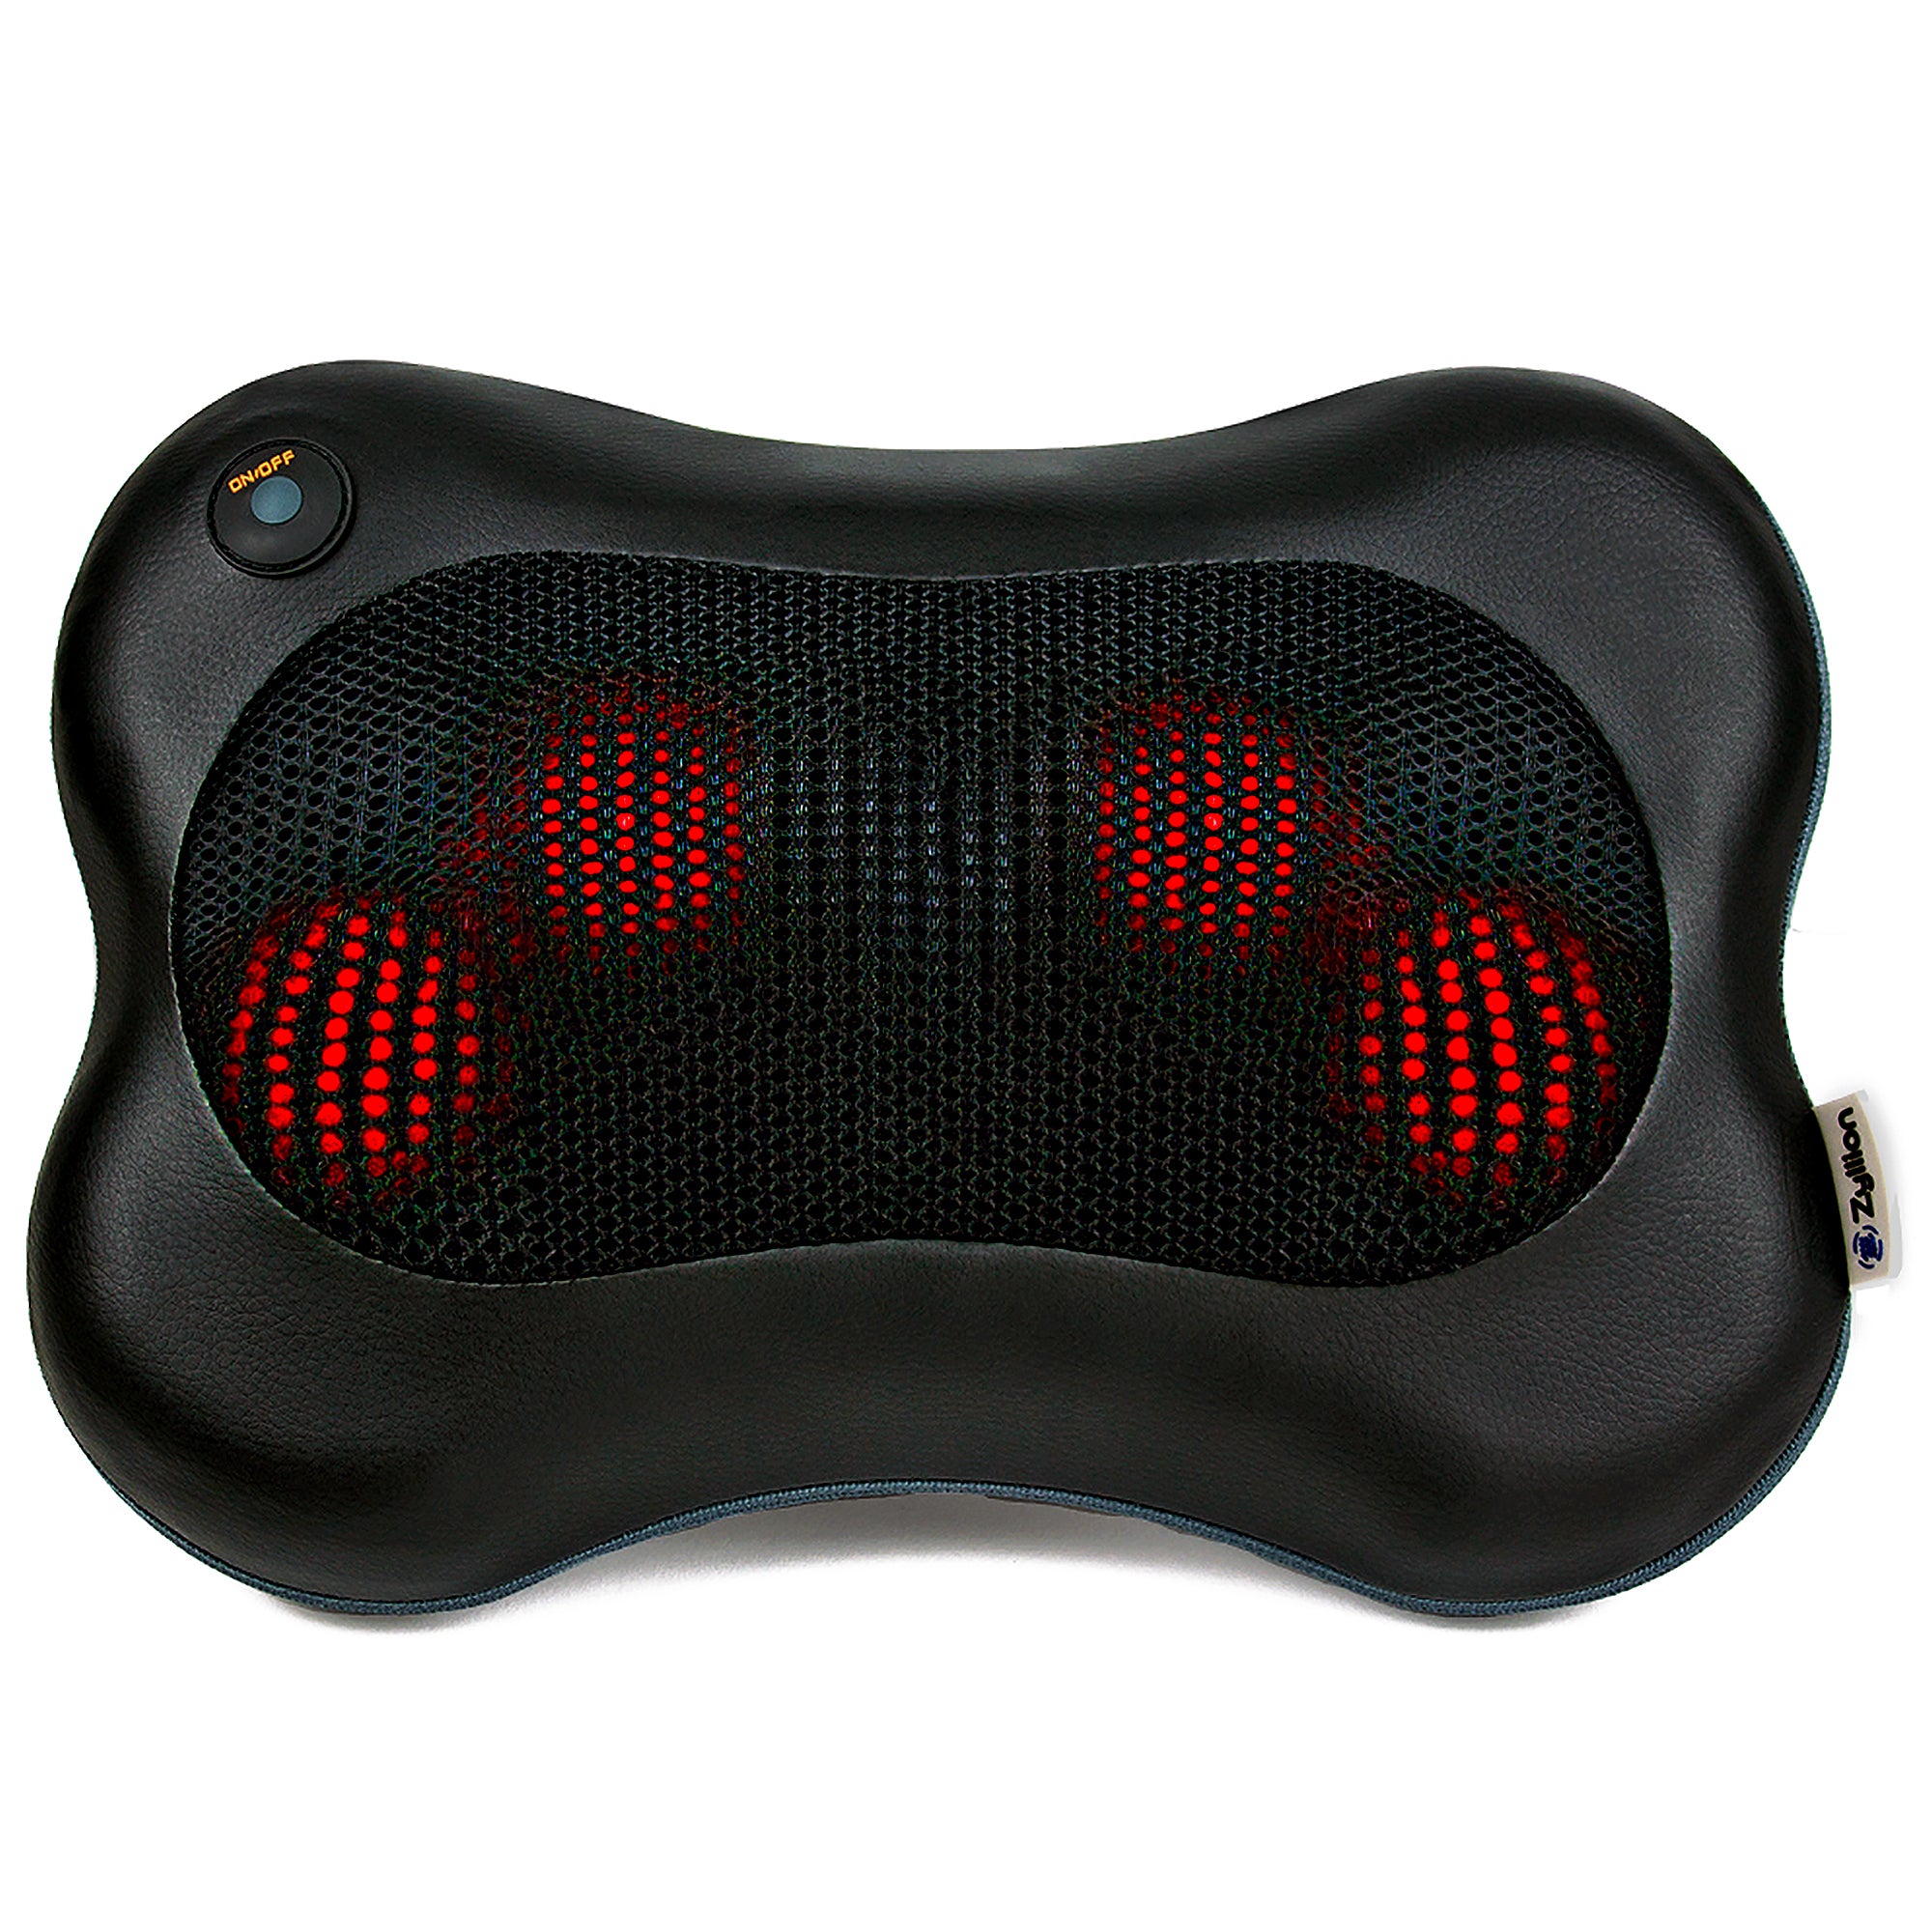 Shiatsu Back Neck Massager with Heat Electric Massager for Back & Shoulder  Massage Pillow Muscle Relaxation Gift for Family